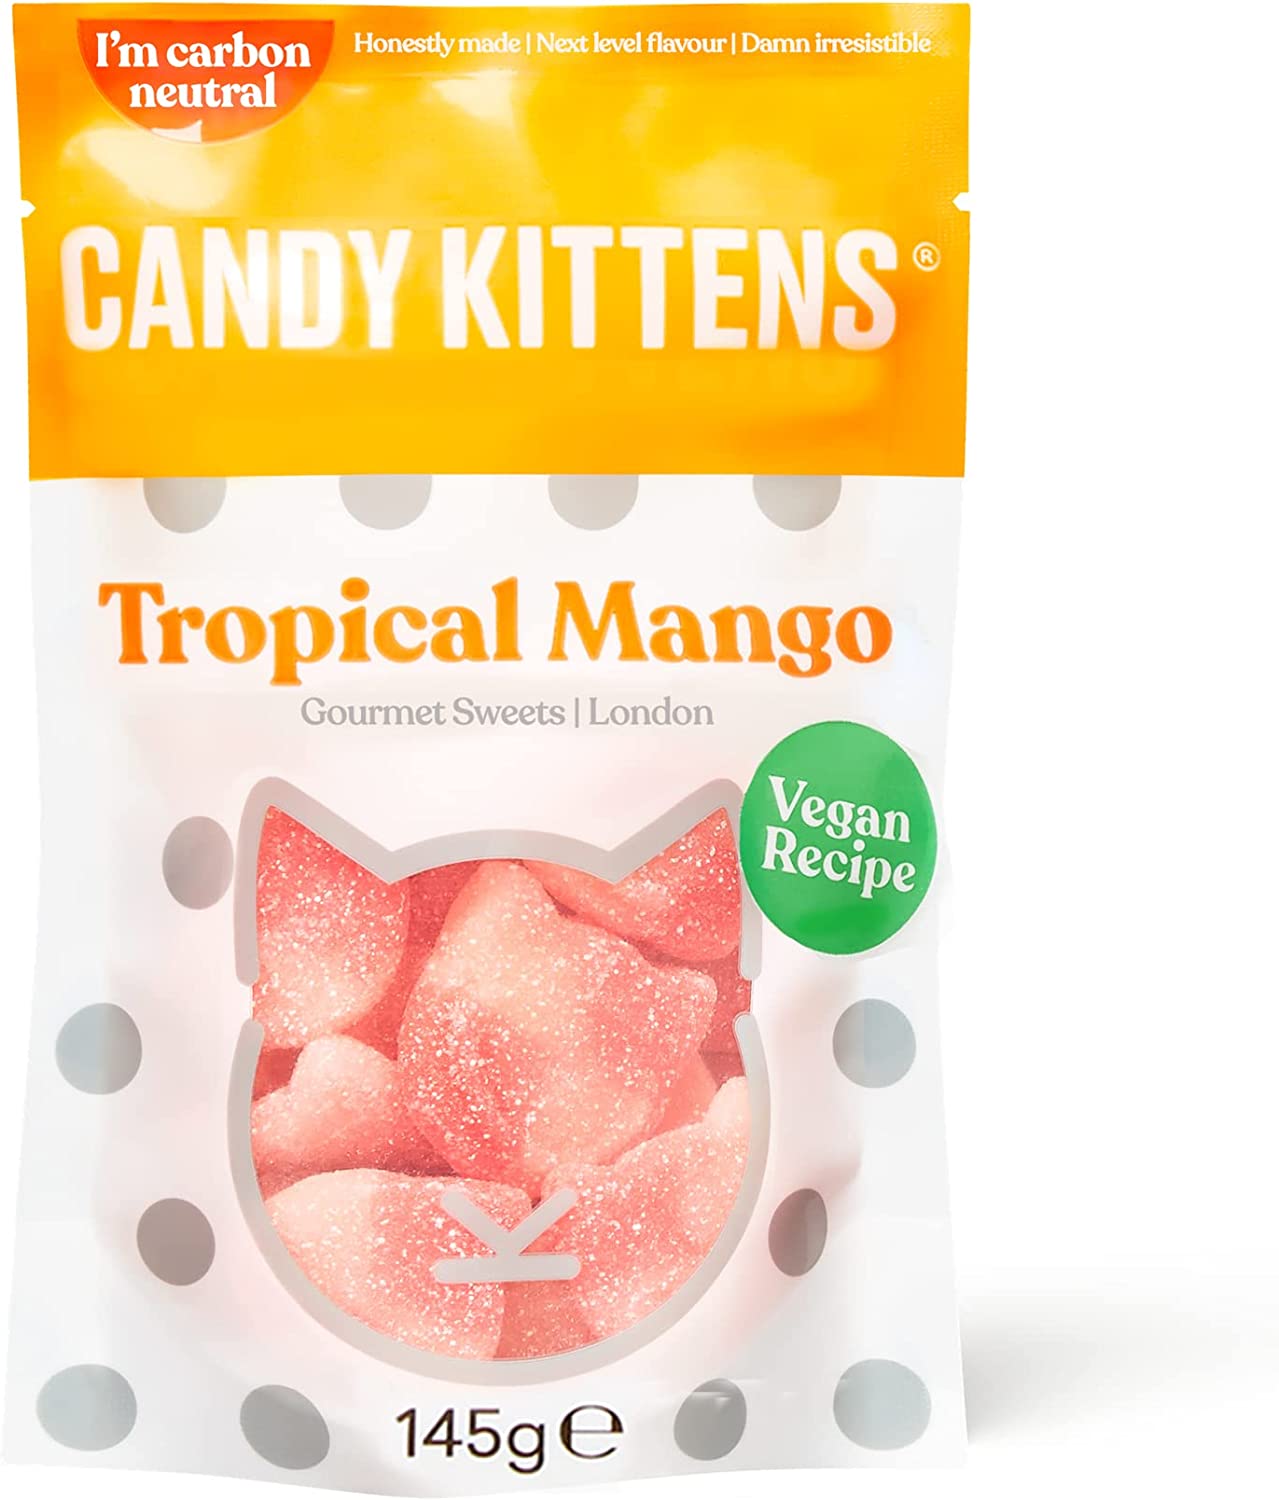 Candy Kittens Tropical Mango Gourmet Sweets Sharing Bag 145g RRP £3 CLEARANCE XL £1.99 or 2 for £3